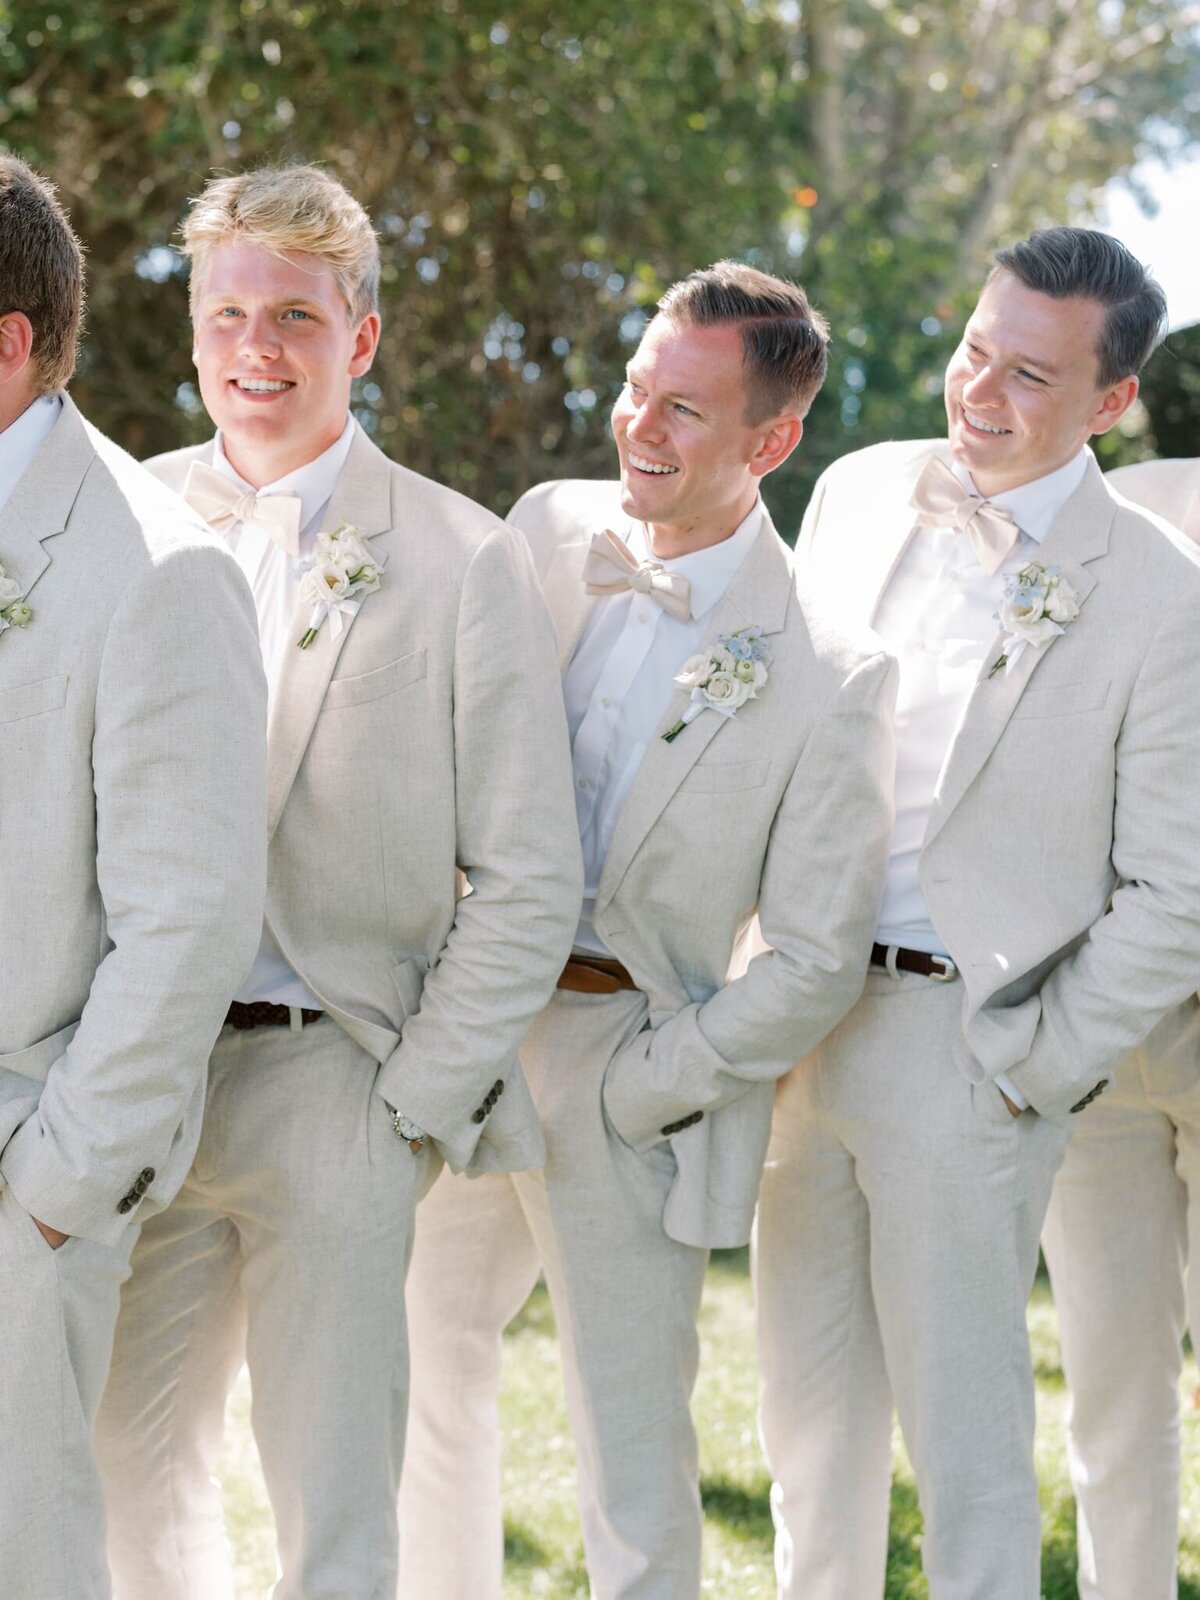 A line of groomsmen with white flower boutonnieres.